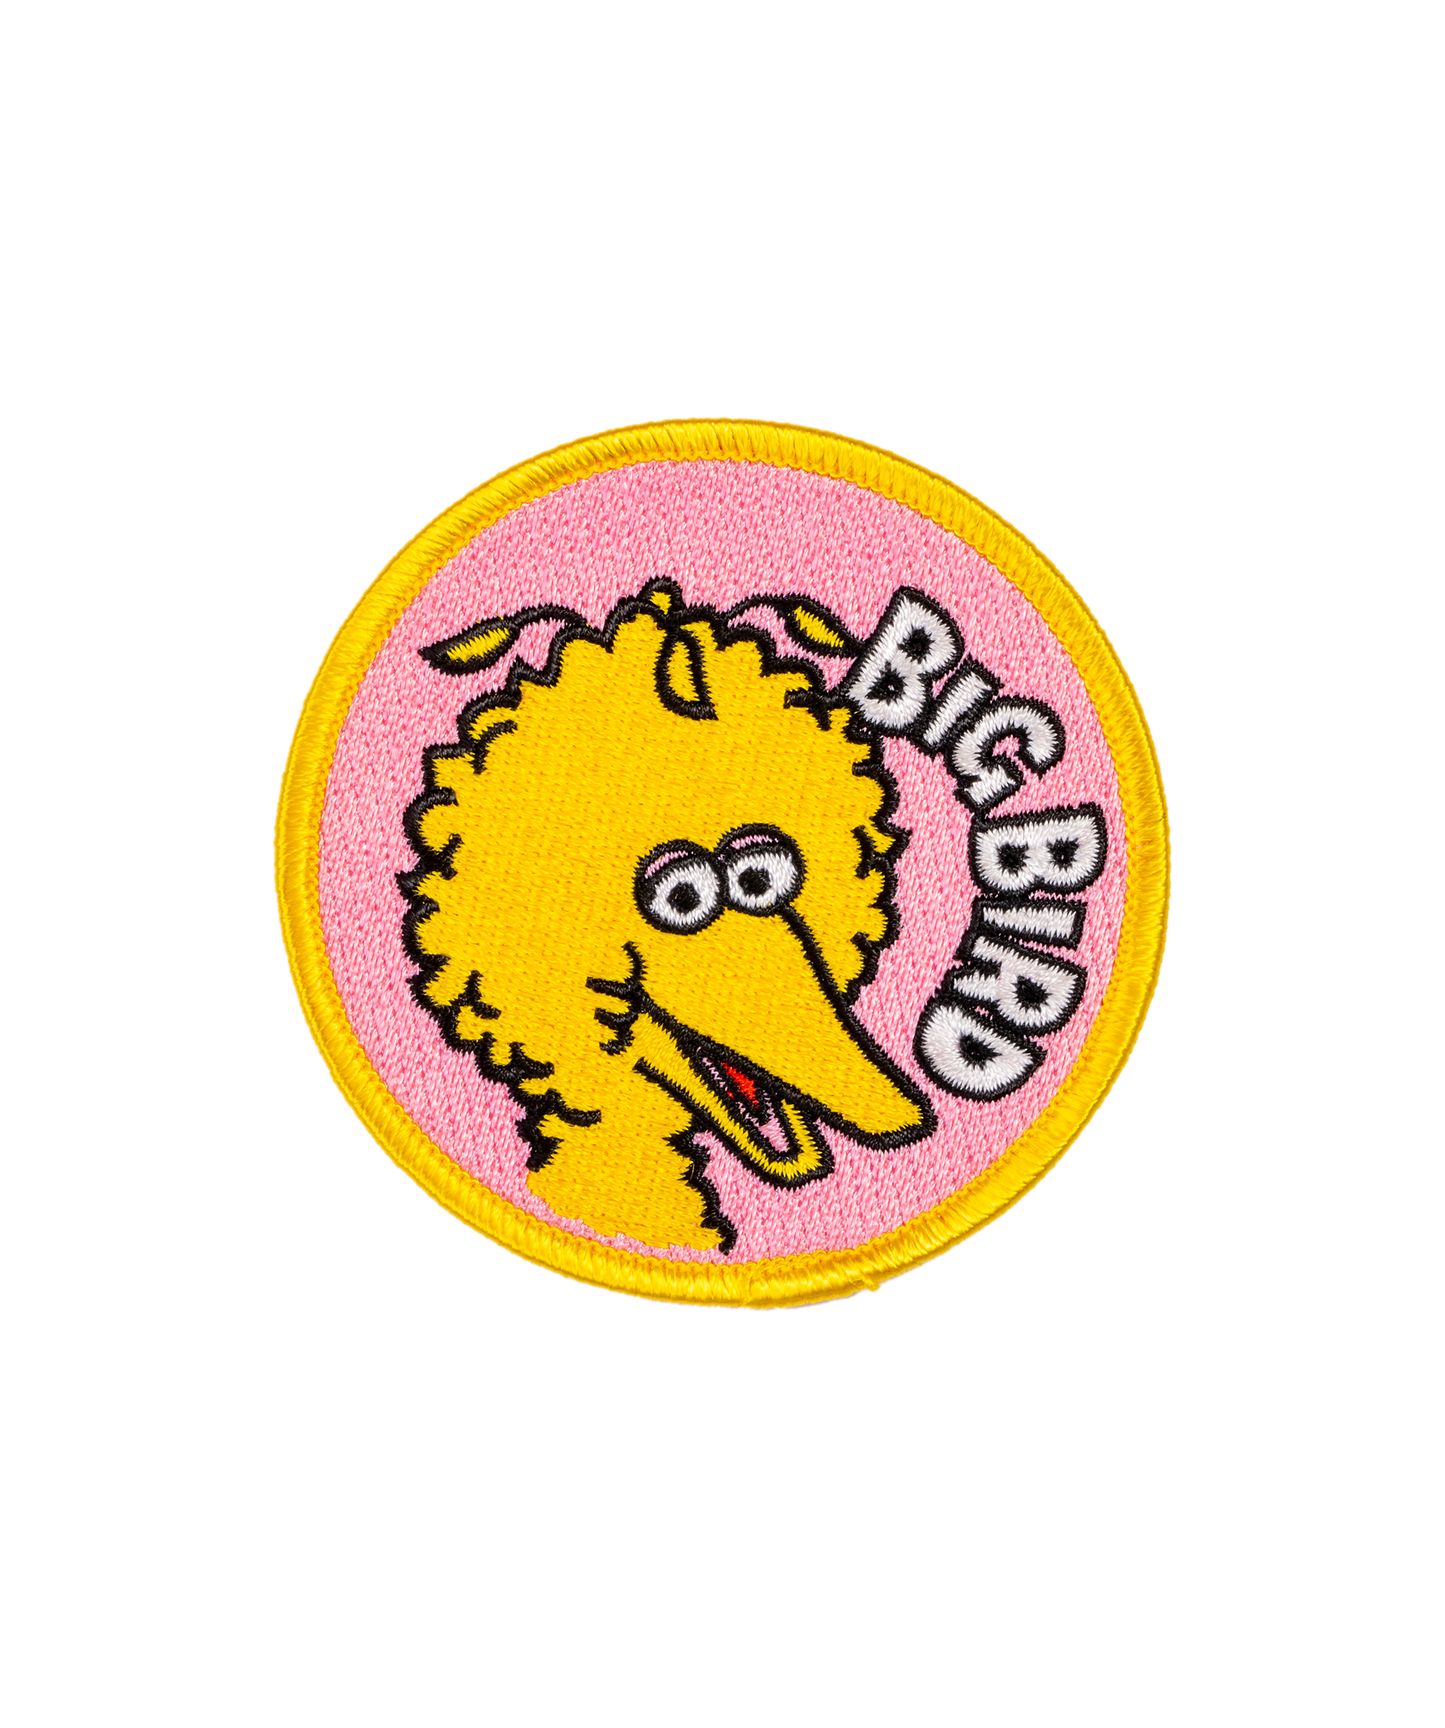 Big Bird Embroidered Patch • Sesame Street x Oxford Pennant